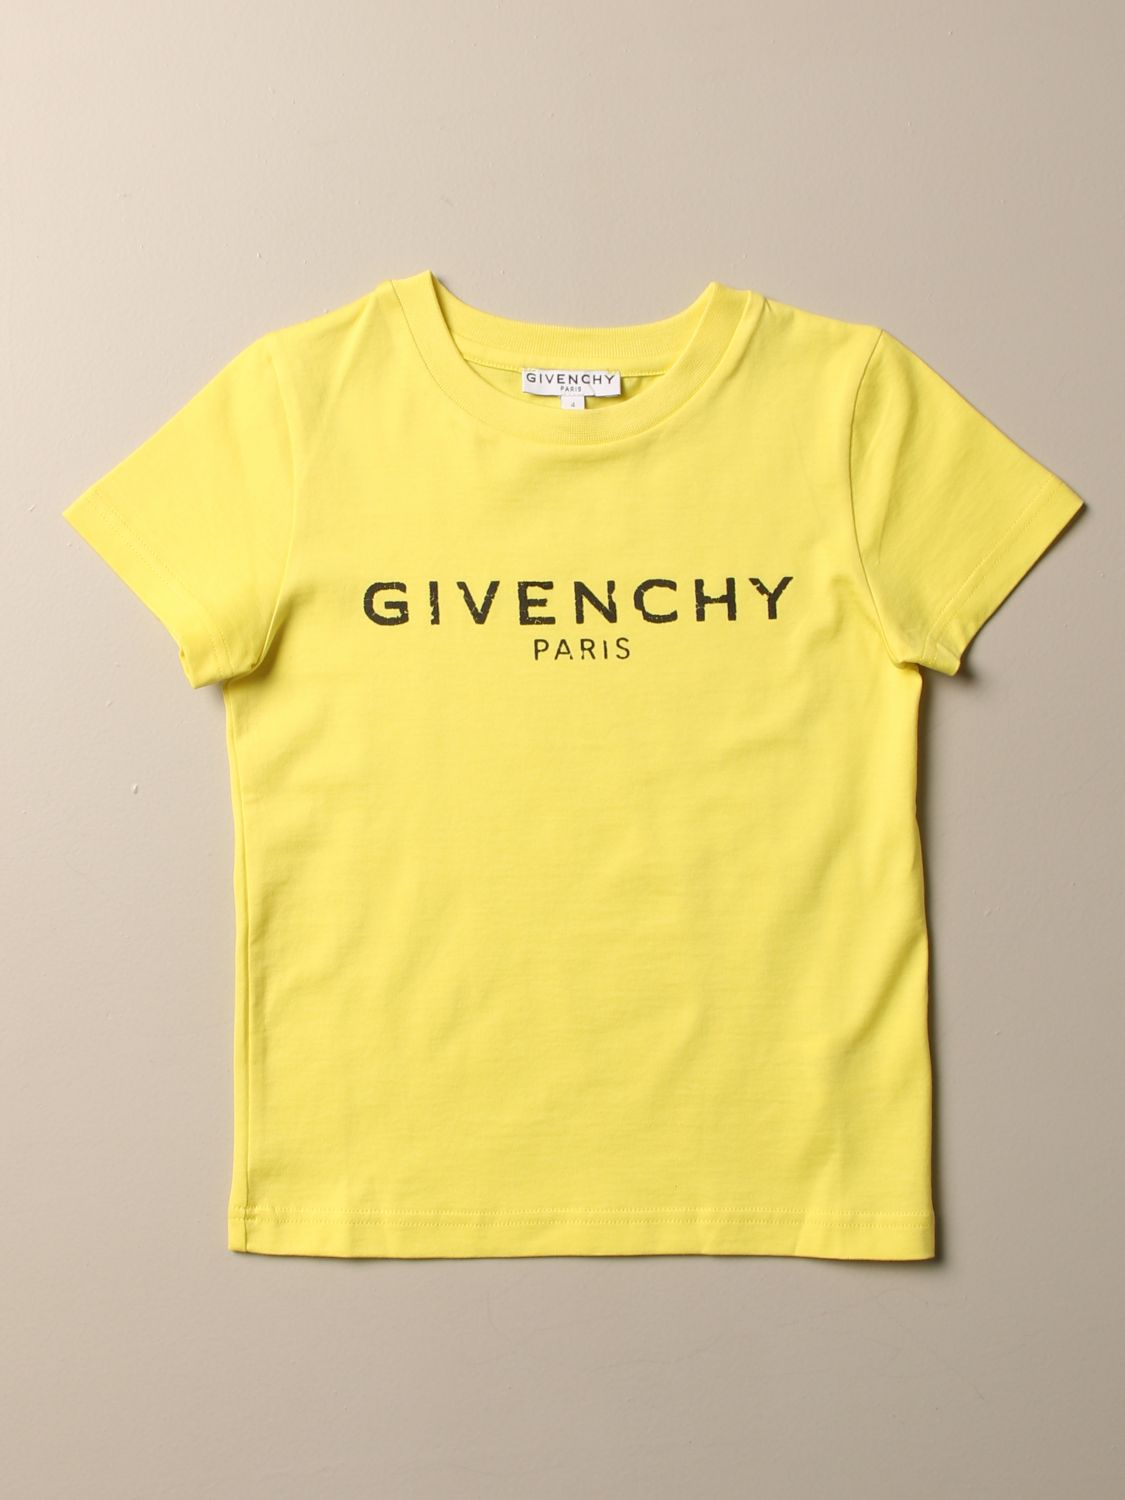 givenchy t shirt outlet